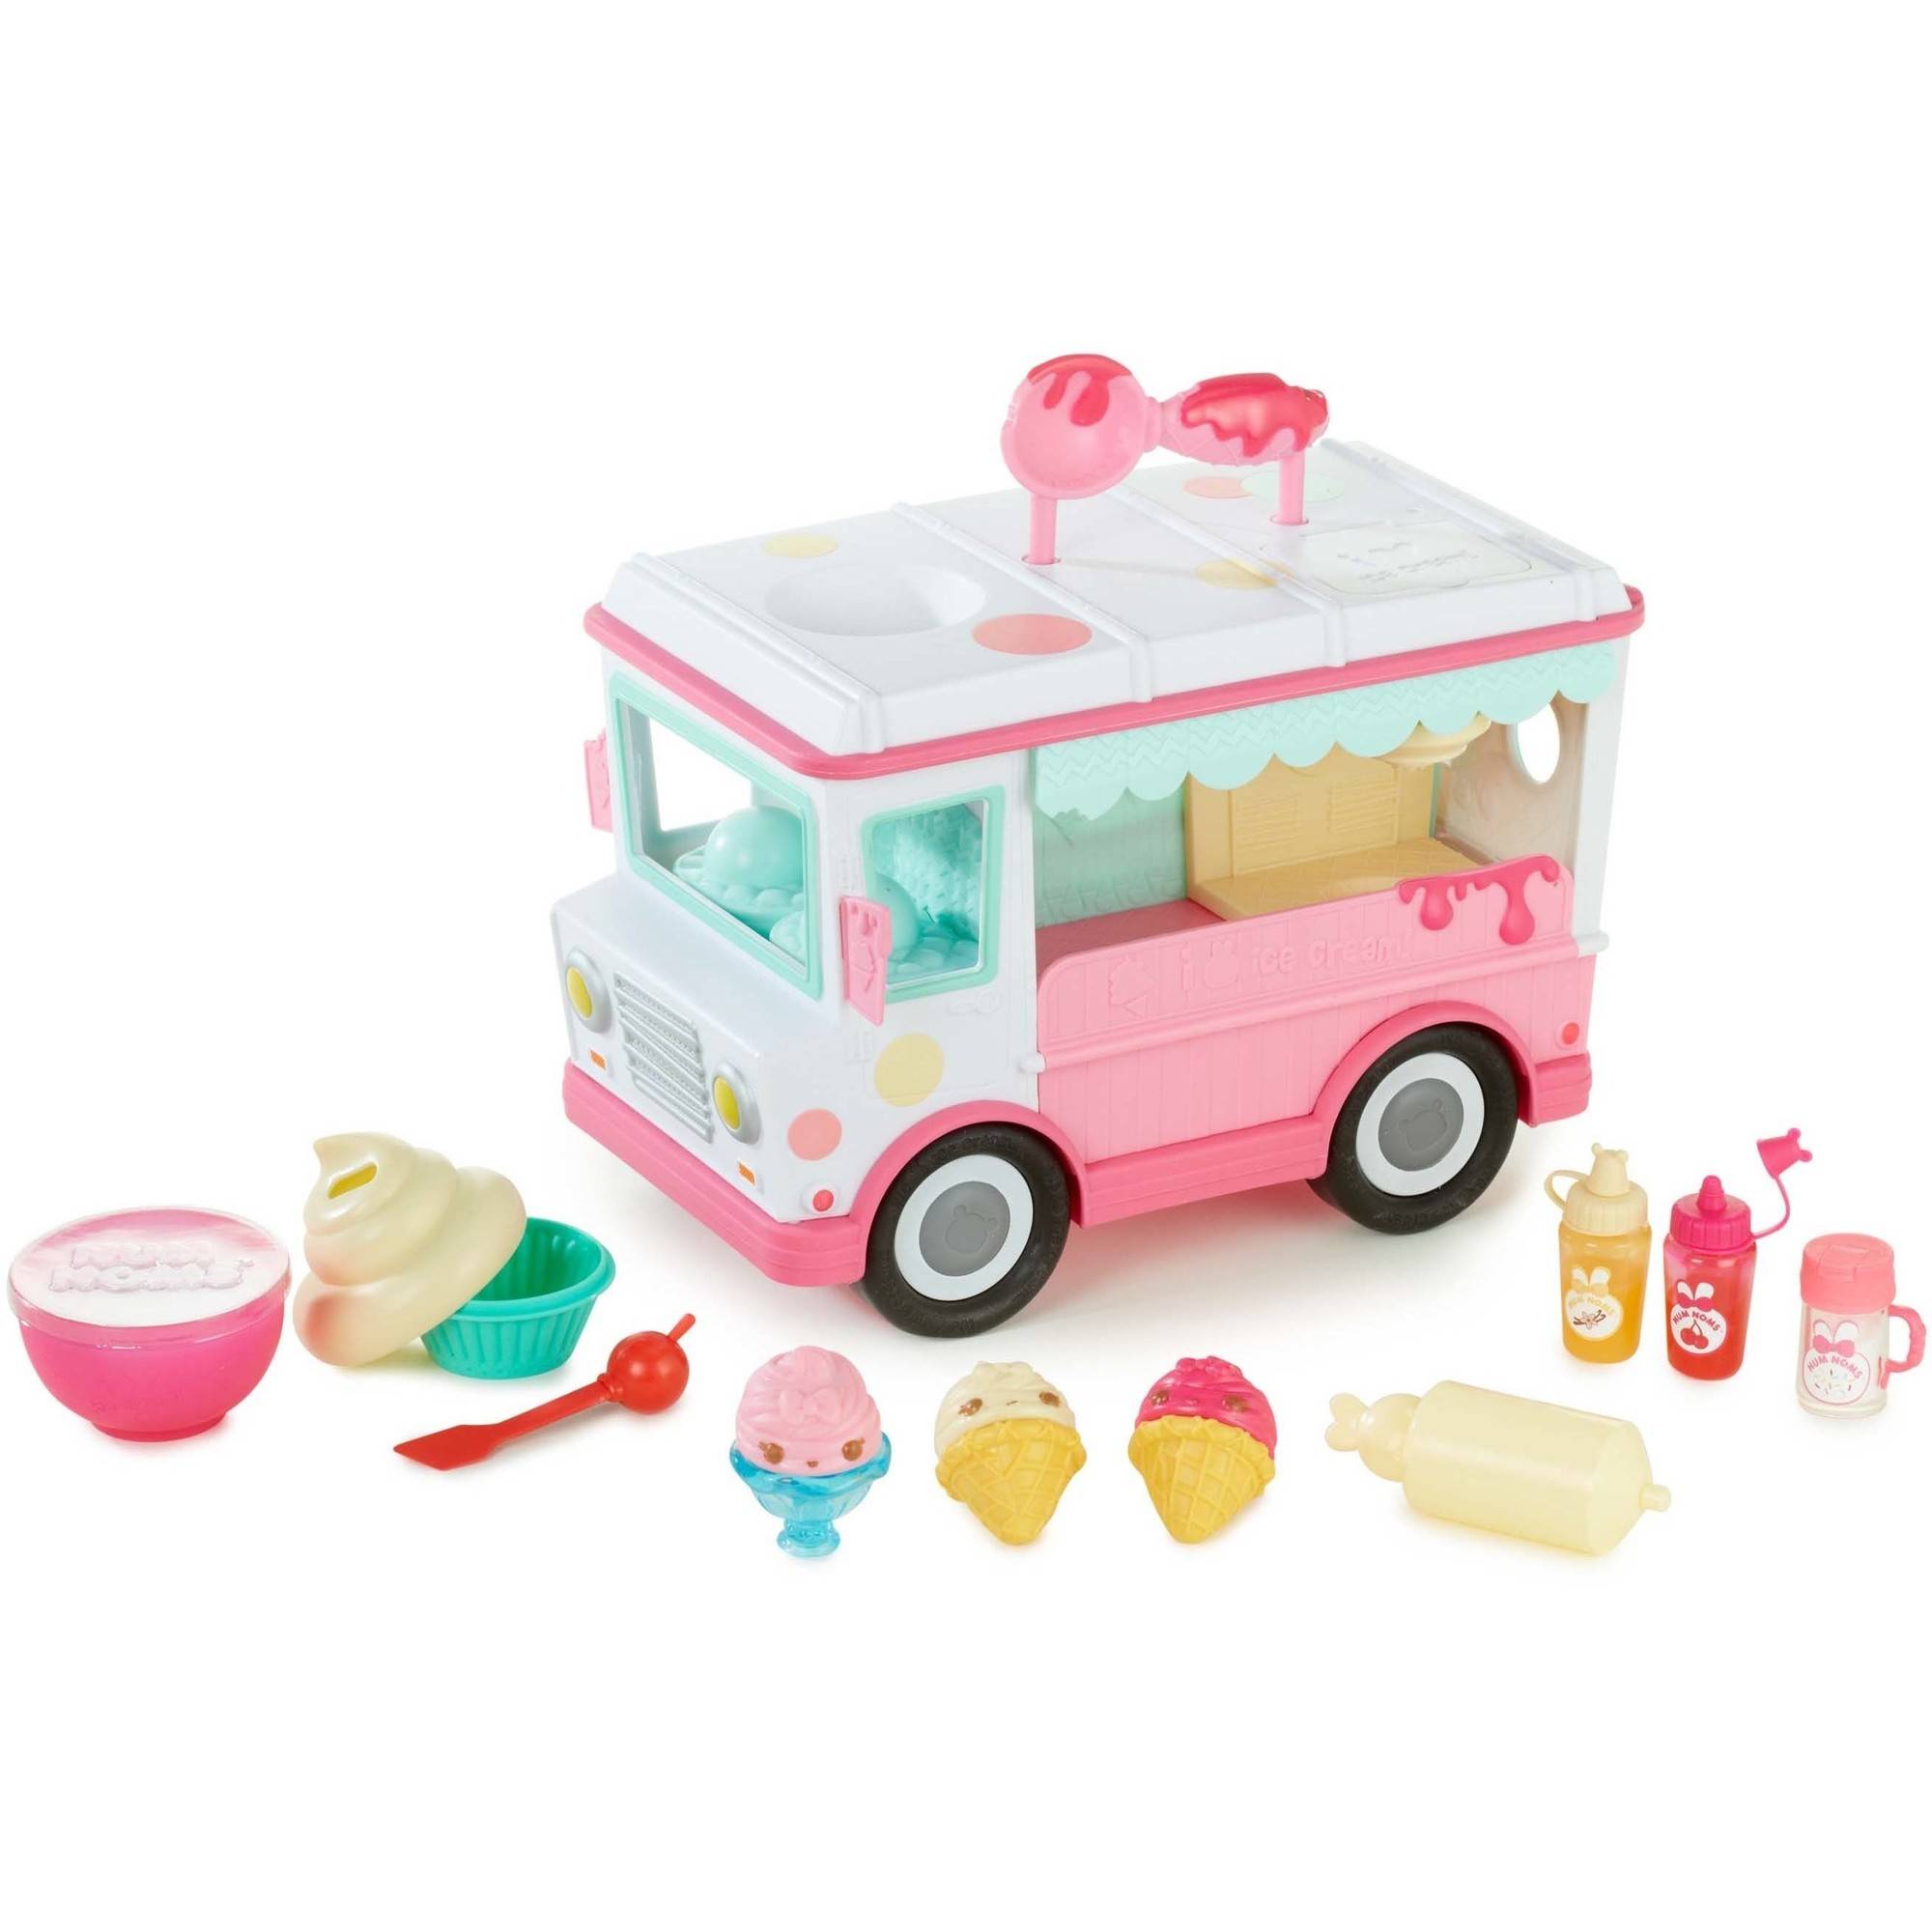 Num Noms Lipgloss Truck Craft Kit - image 2 of 4